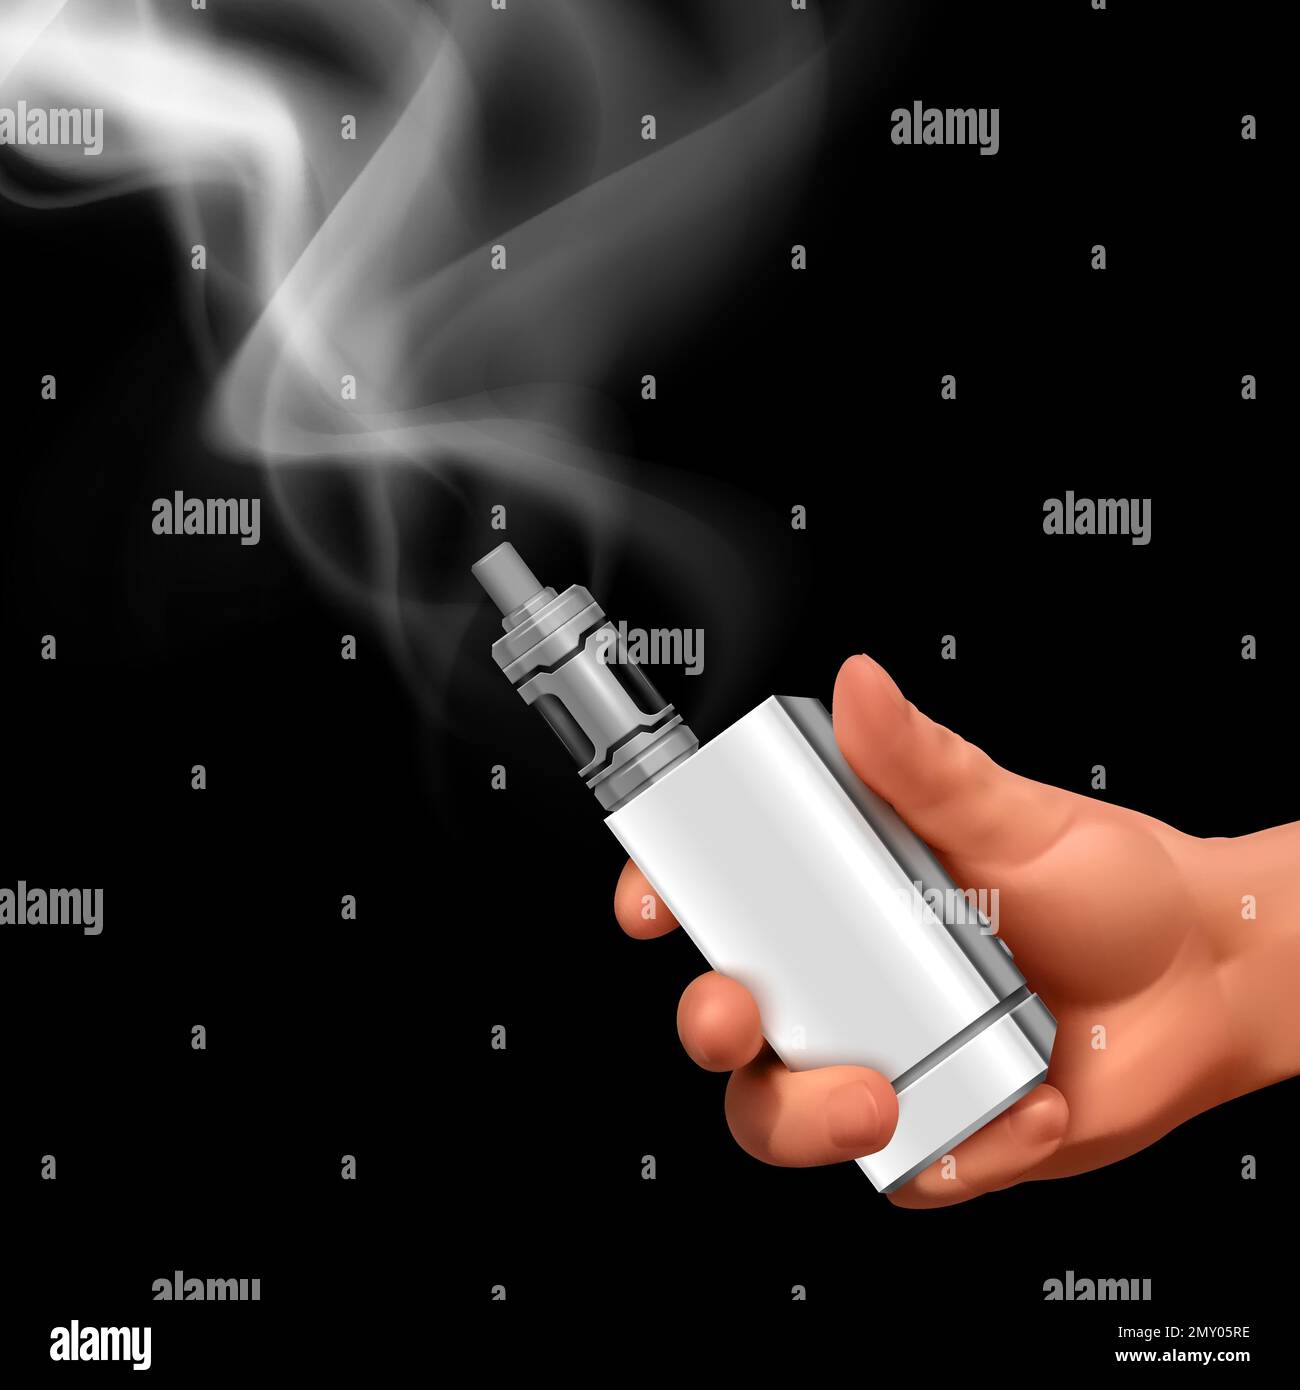 Realistic vape composition with human hand holding vaping device with smoke puff image on black background vector illustration Stock Vector